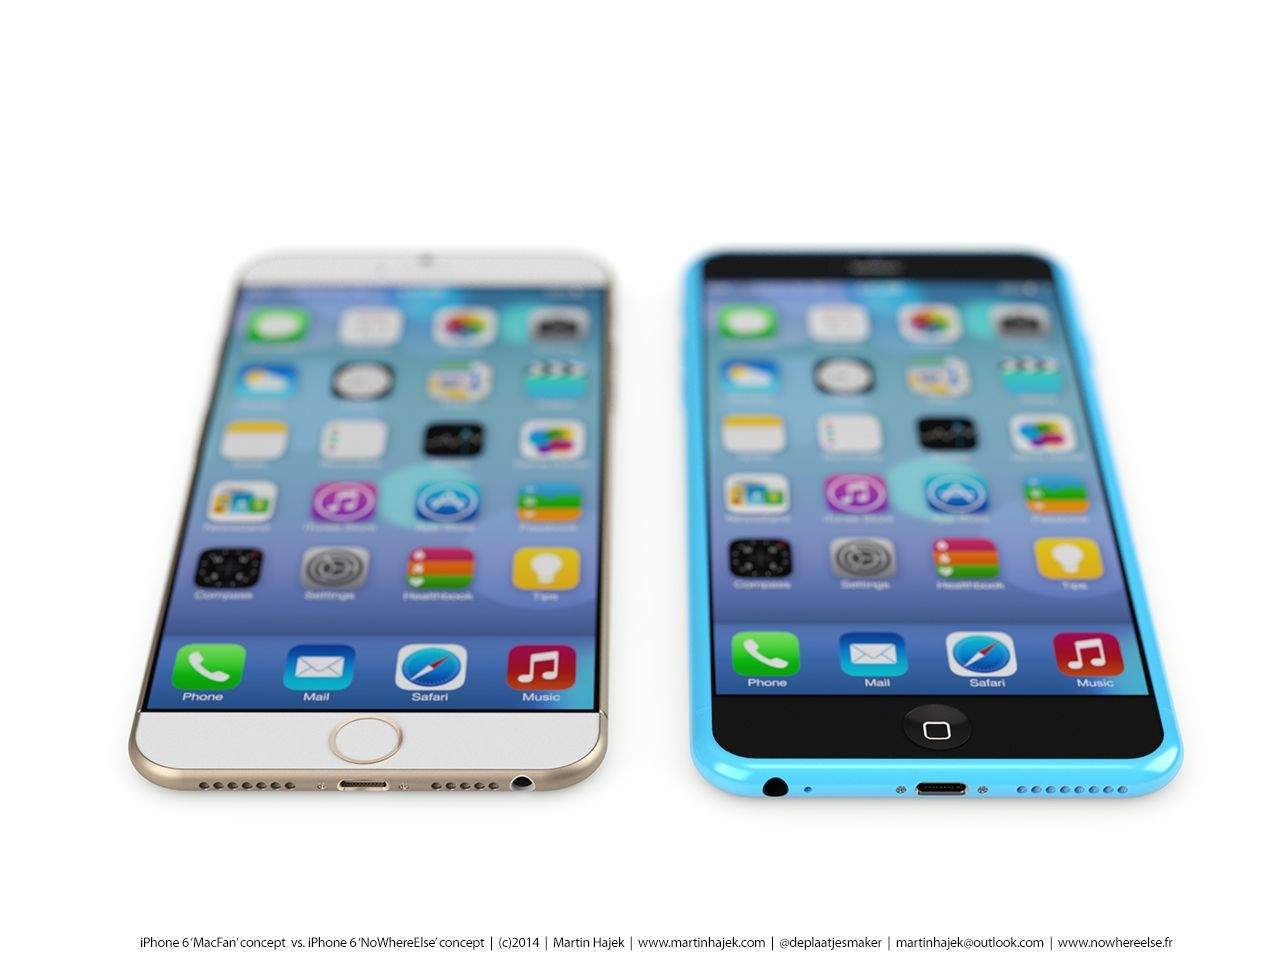 iPhone 6 and 6c concept